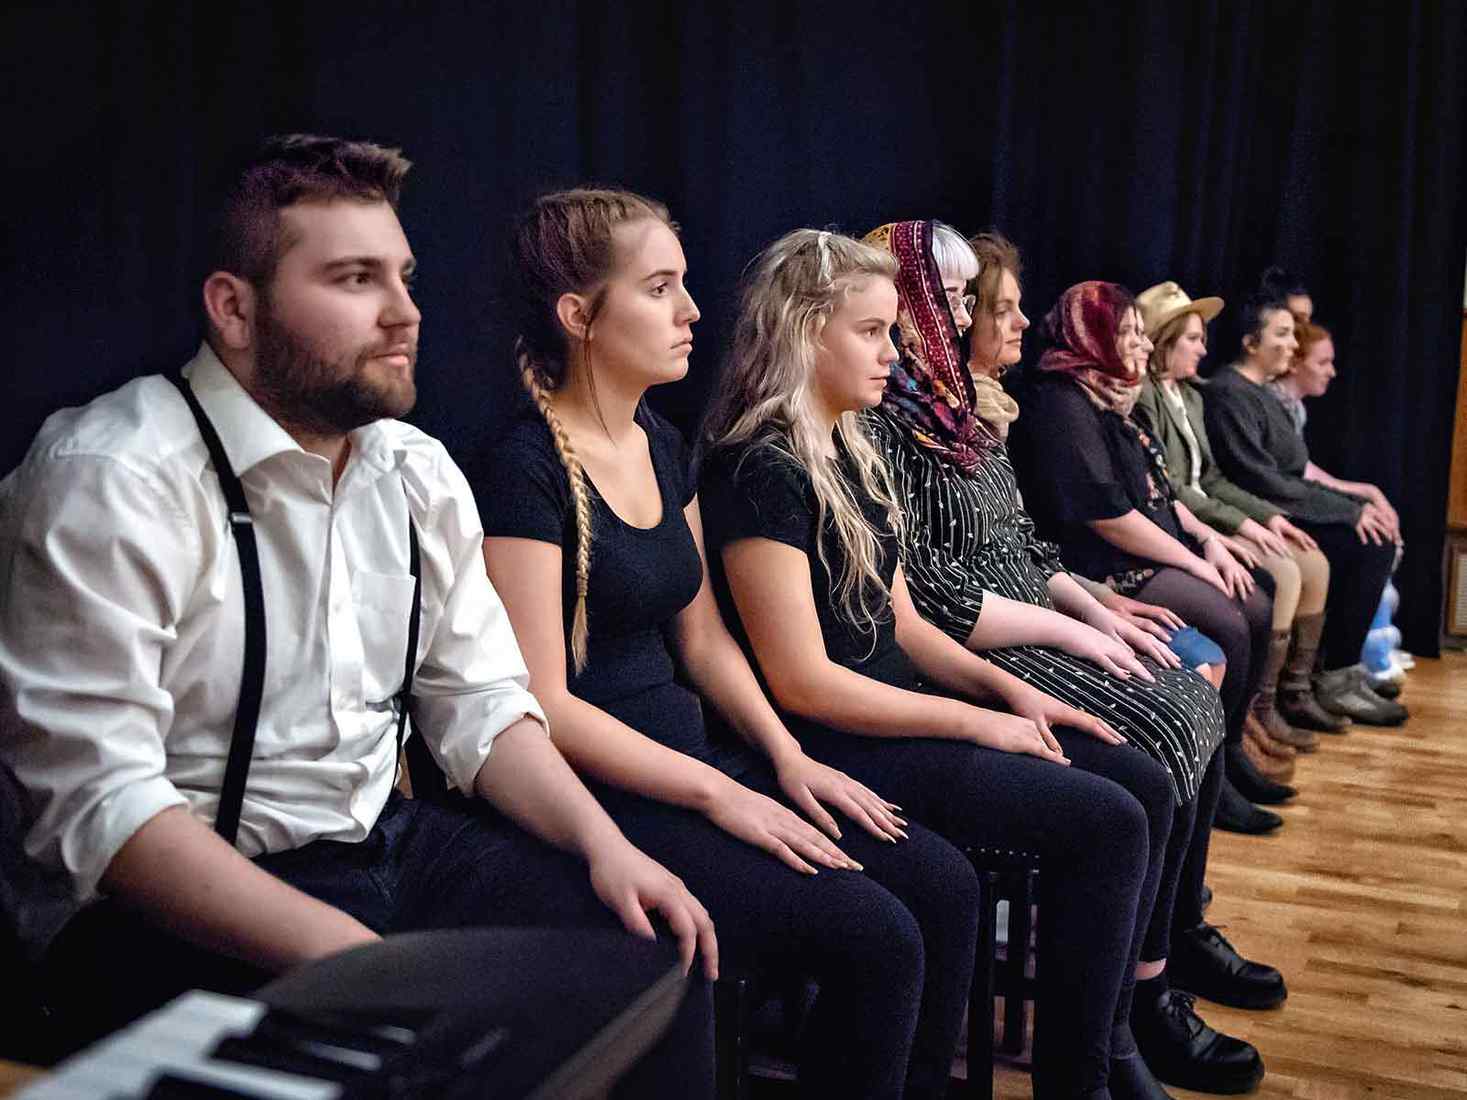 Students sat in performance 